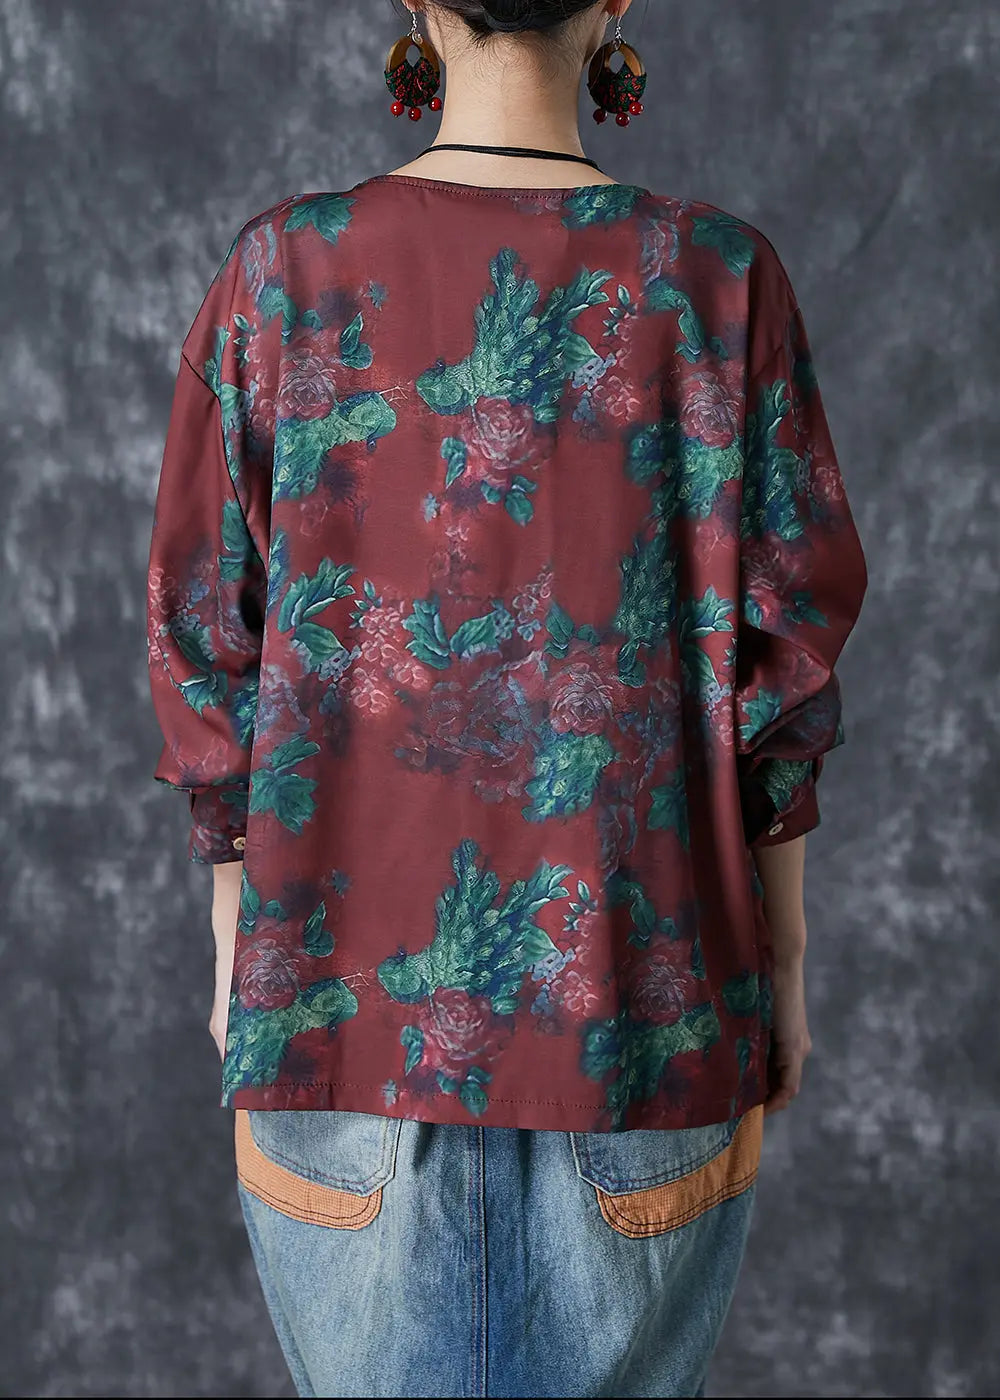 Plus Size Mulberry Chinese Button Floral Print Cotton Shirt Top Fall Ada Fashion